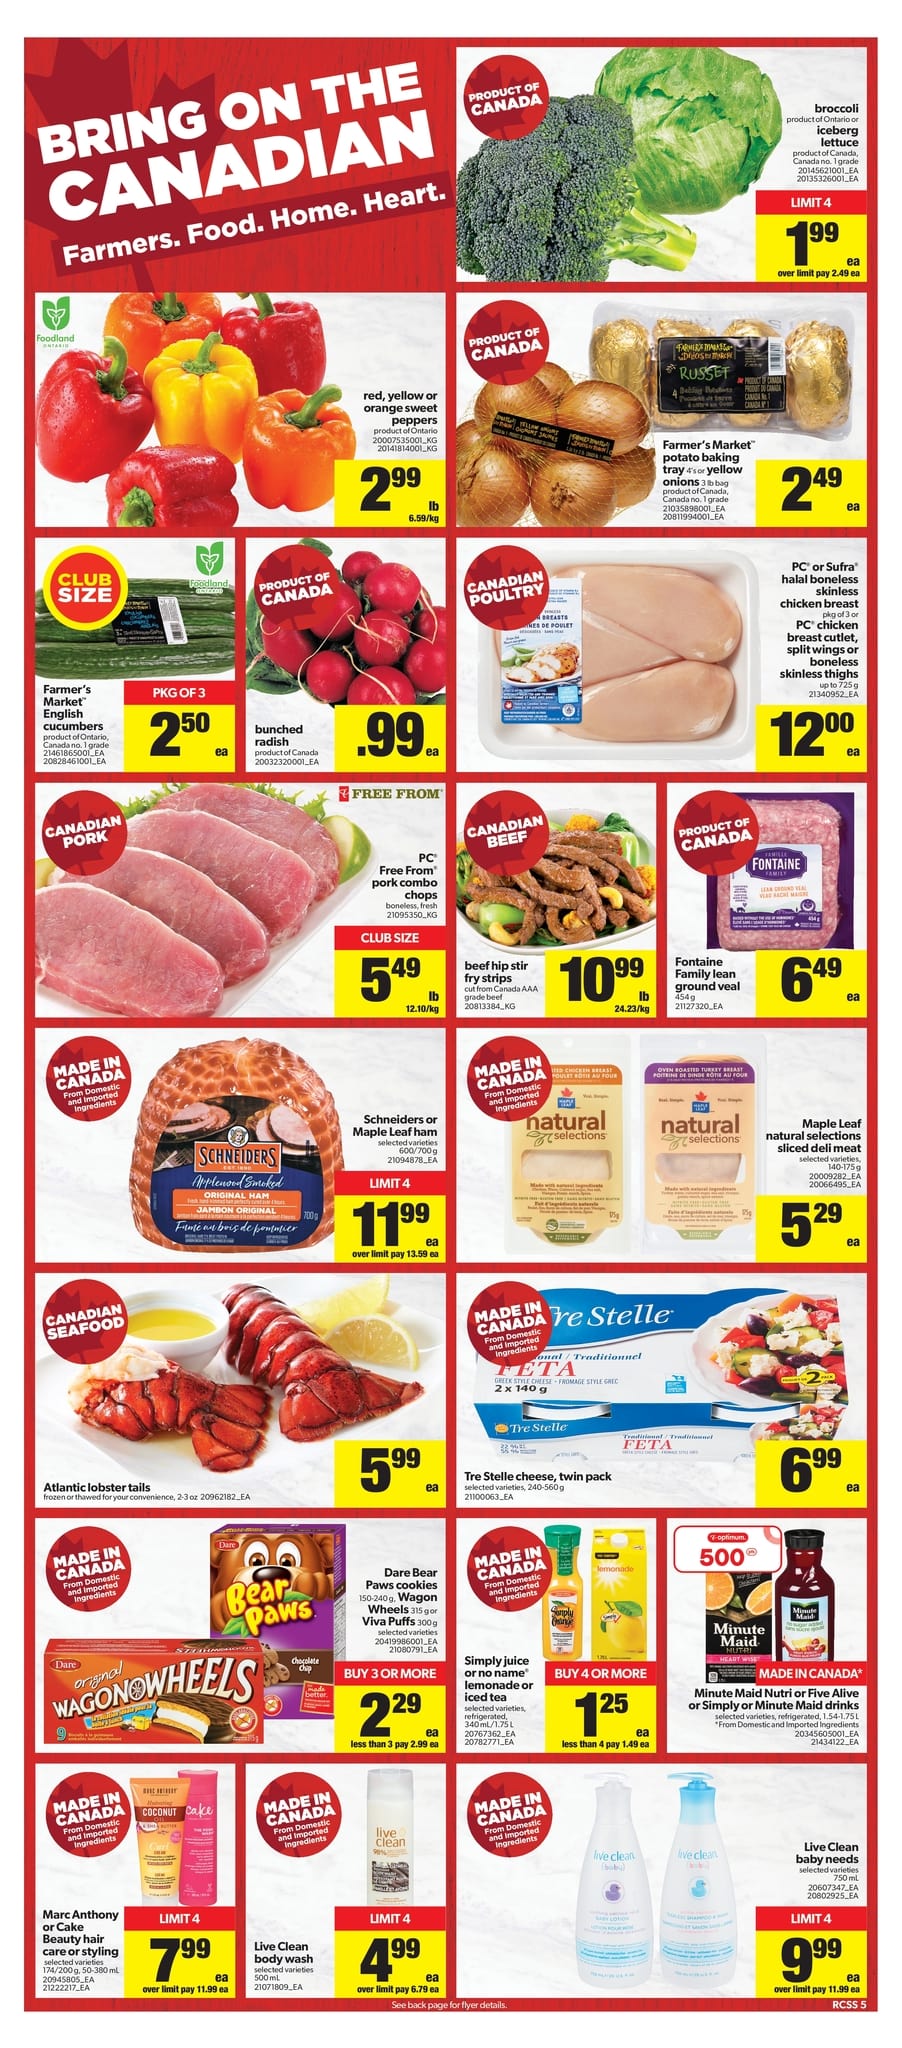 Real Canadian Superstore Ontario - Weekly Flyer Specials - Page 6